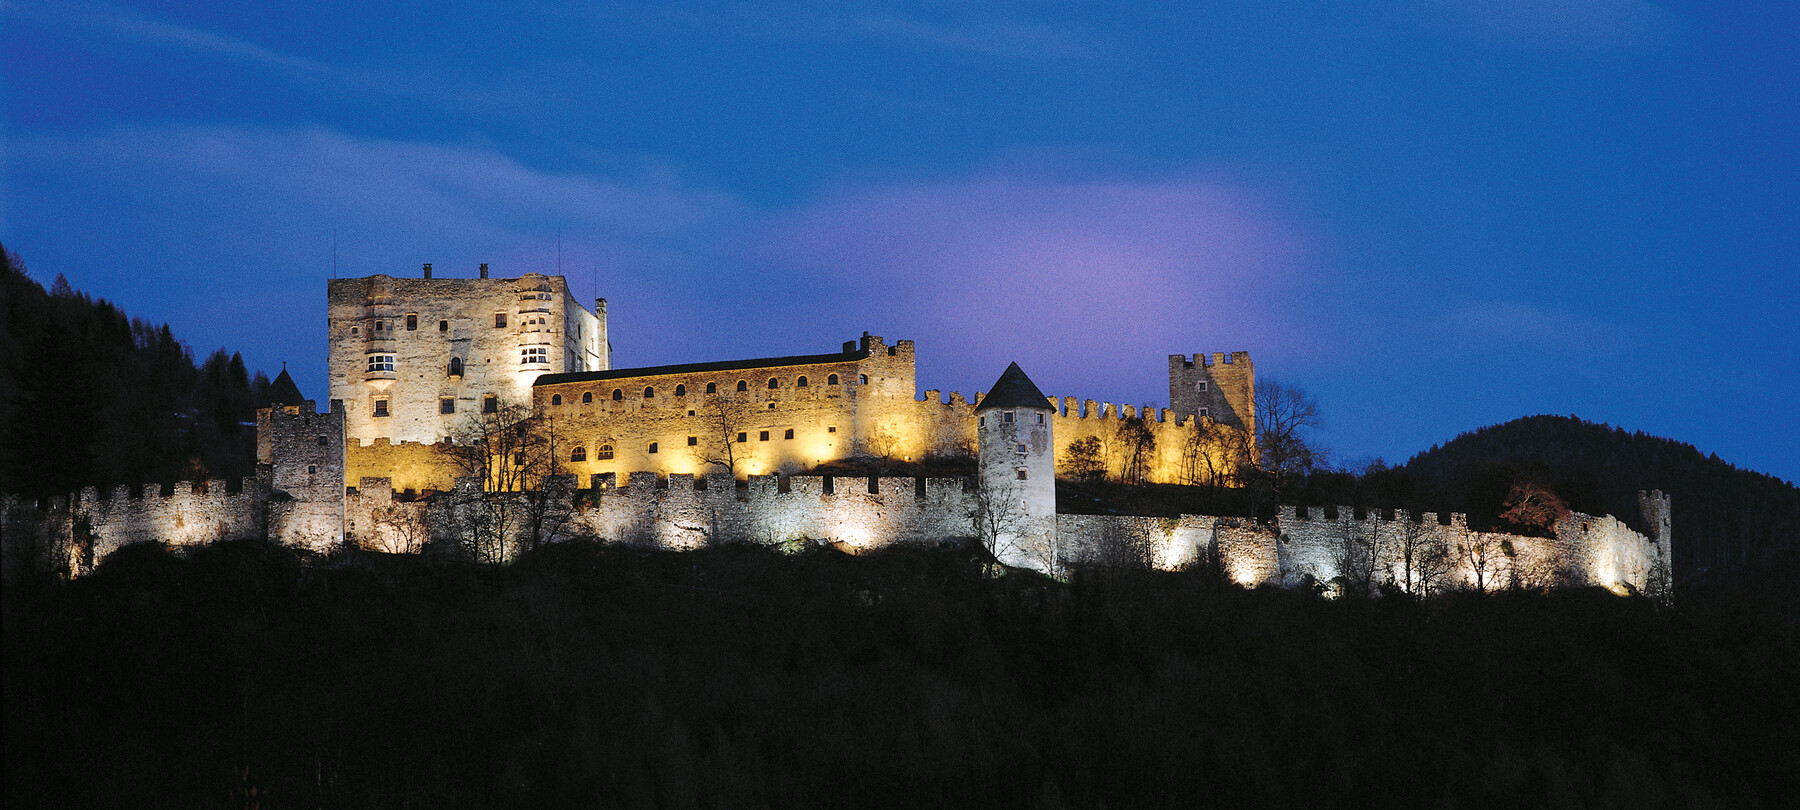 Romantic weekend: spend the night in a castle